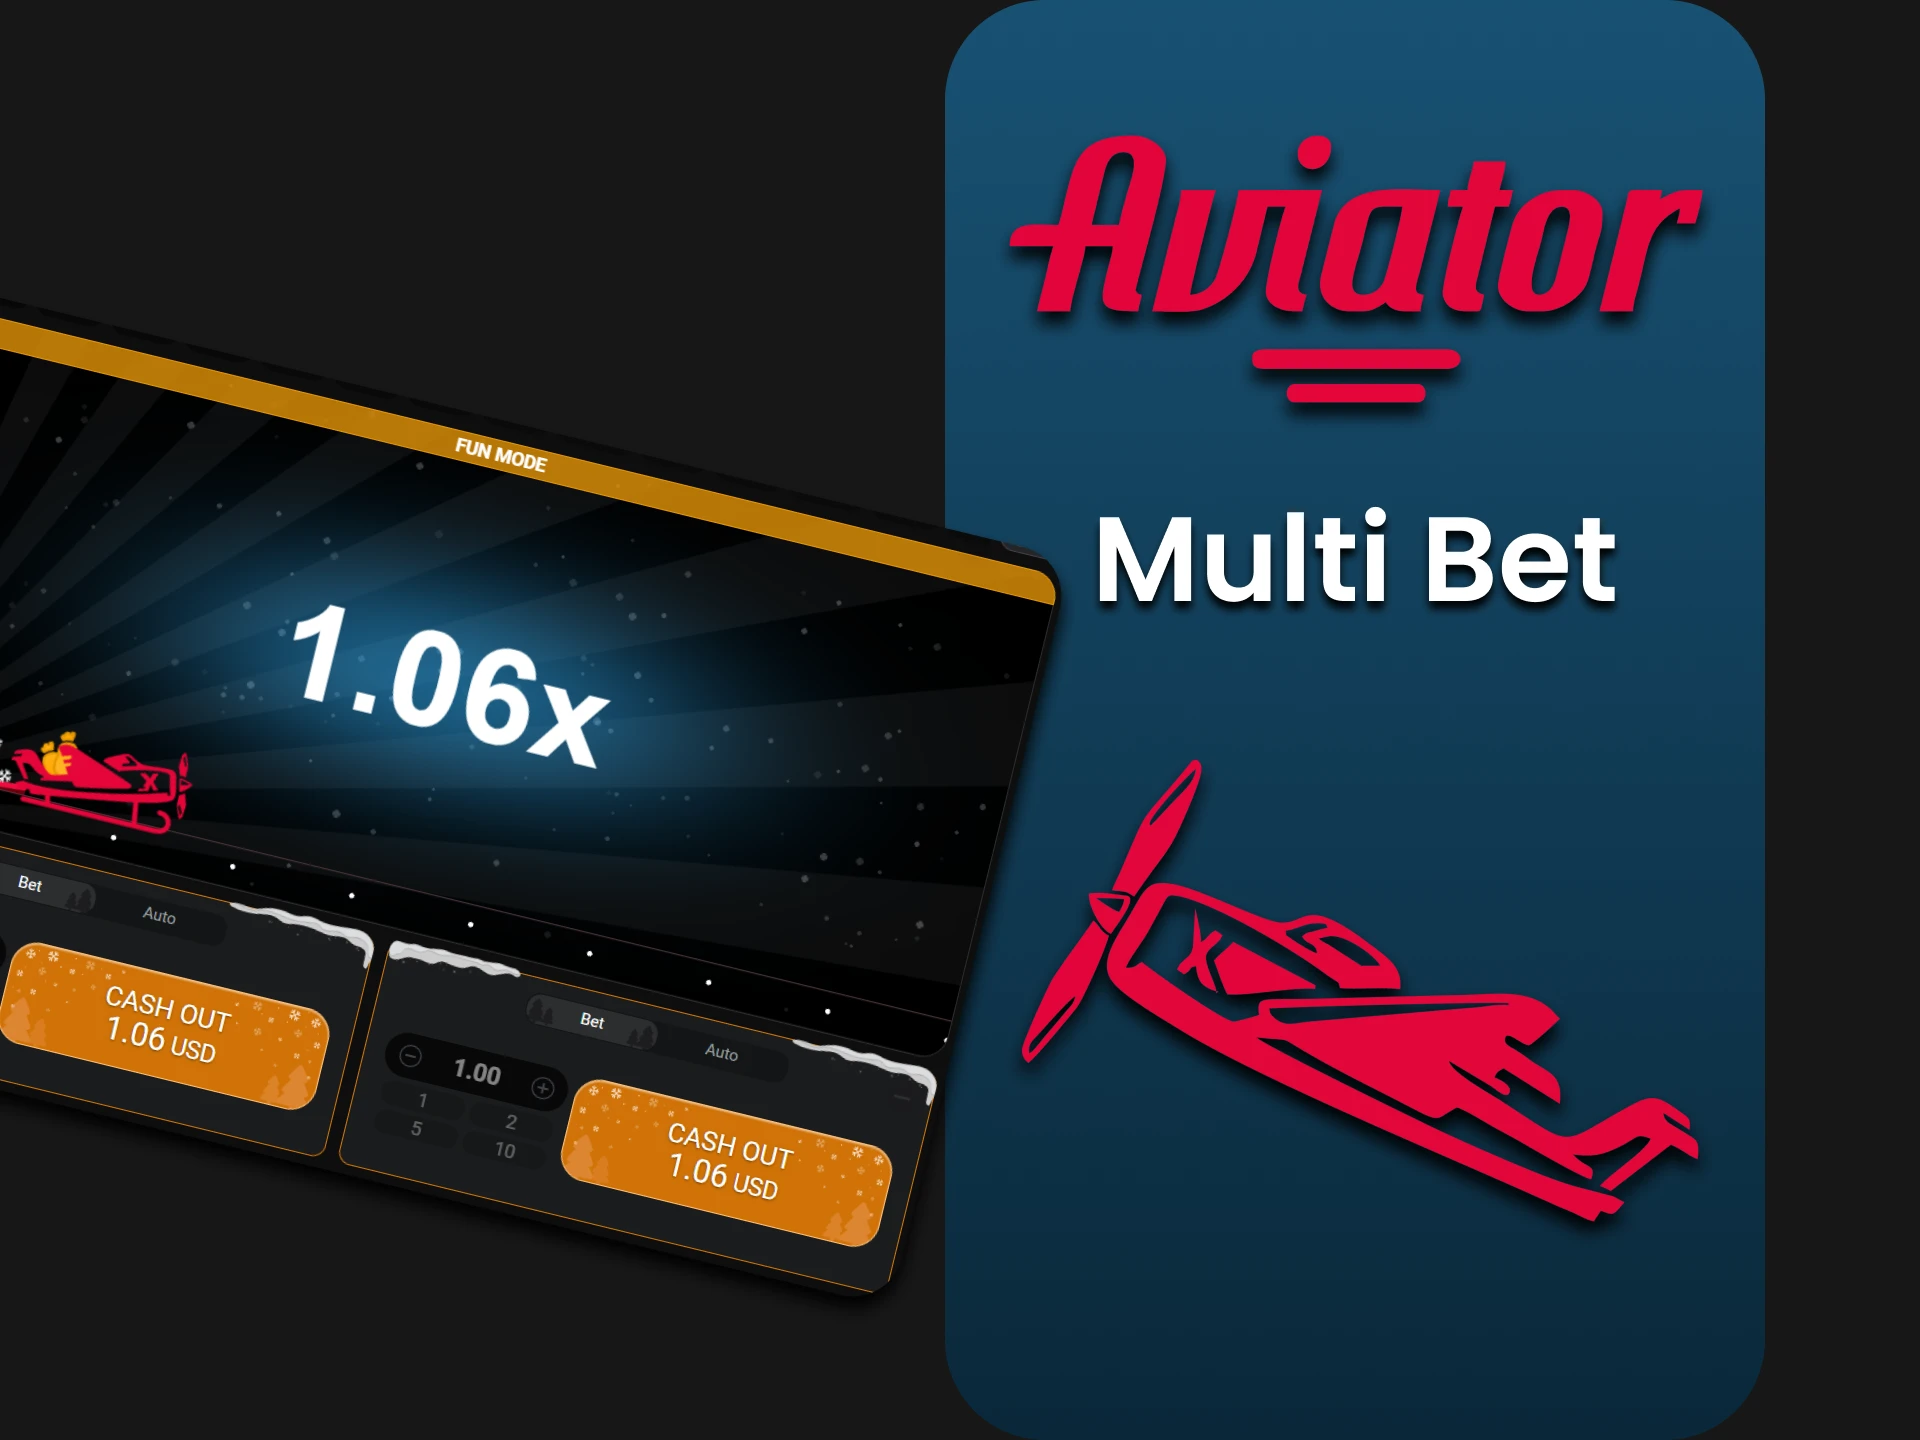 We will tell you about the Multi Bet strategy for Aviator.